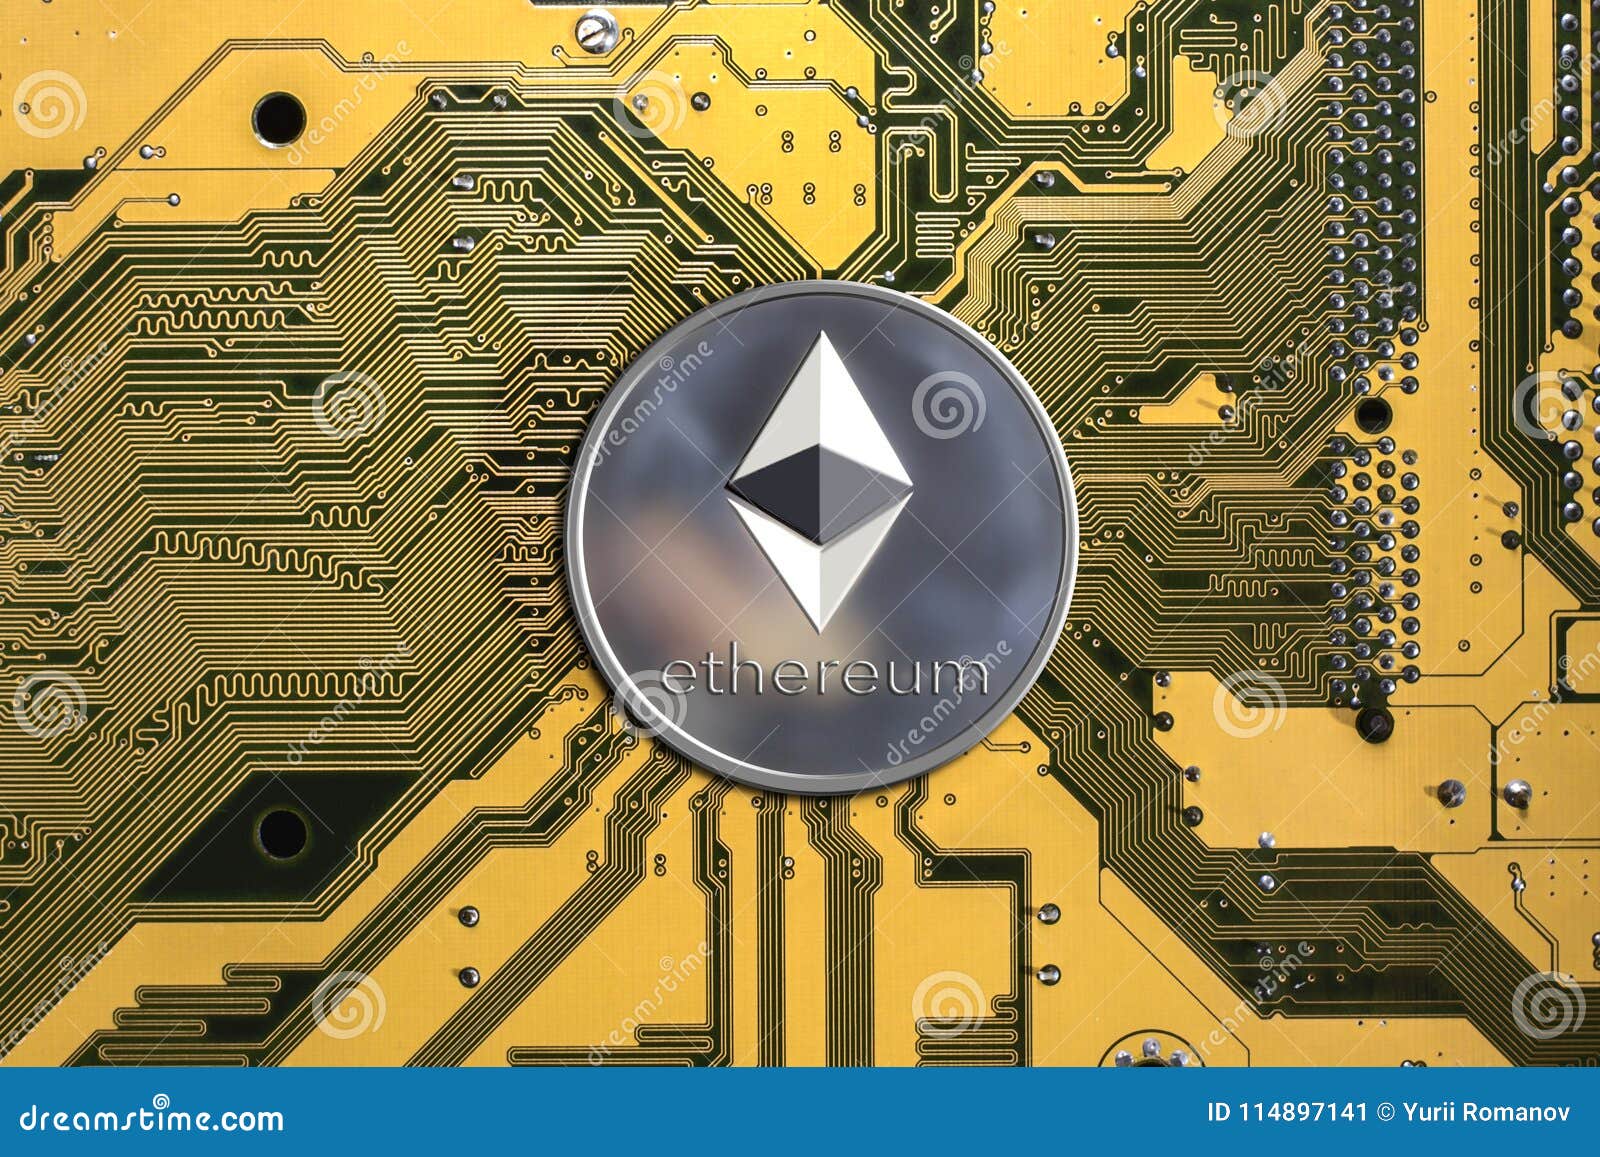 Crypto Currency Ethereum. Ethereum Coin Stock Image ...